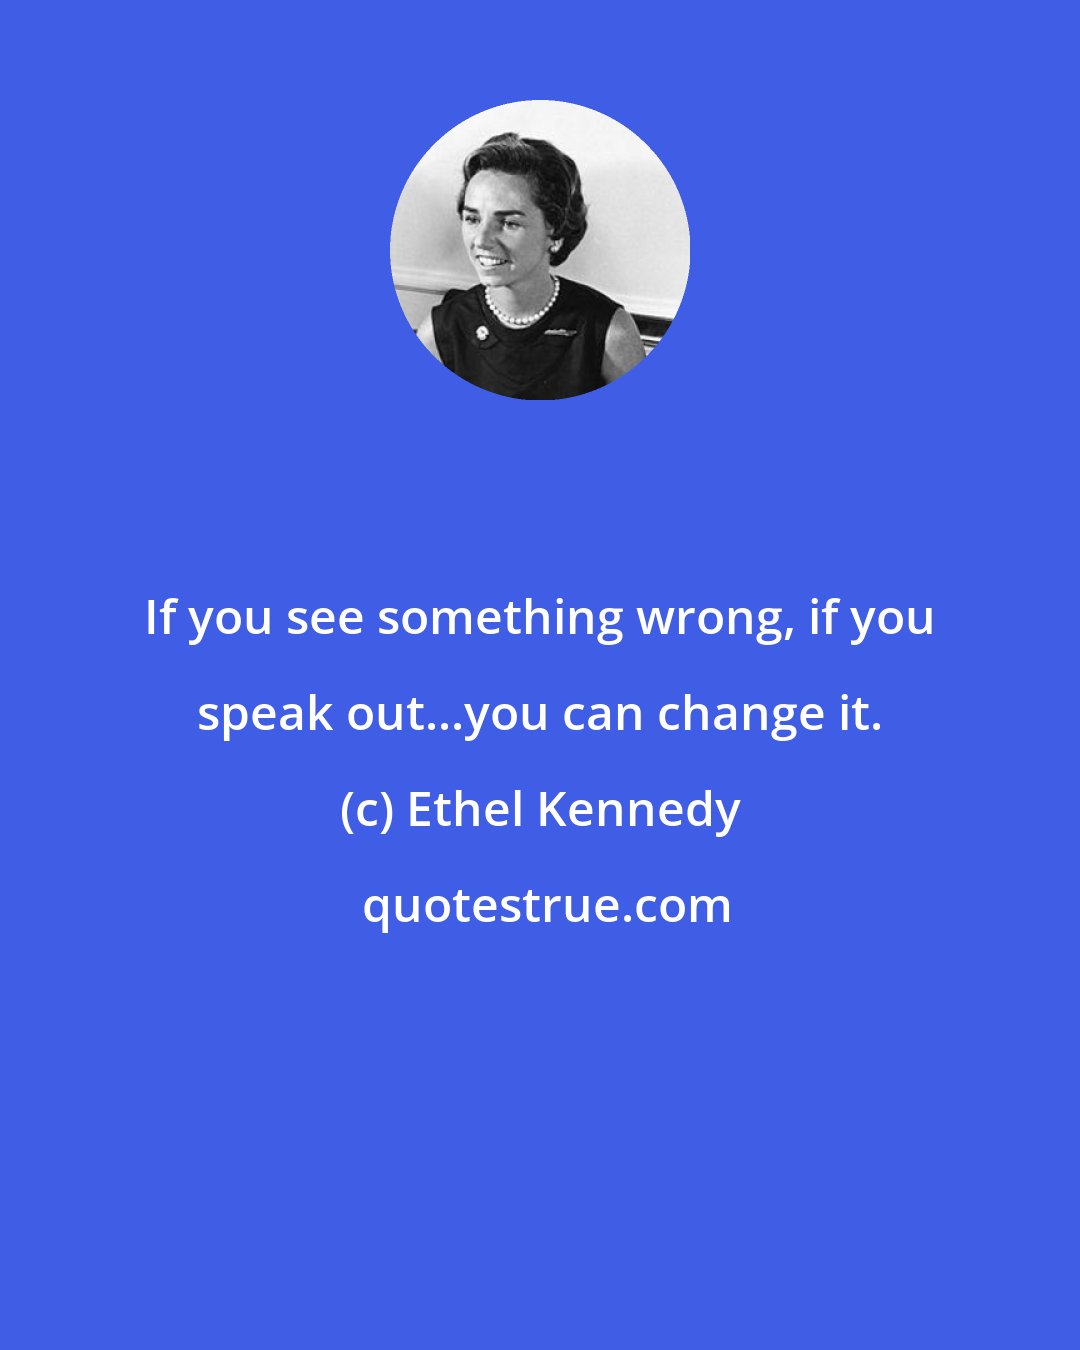 Ethel Kennedy: If you see something wrong, if you speak out...you can change it.